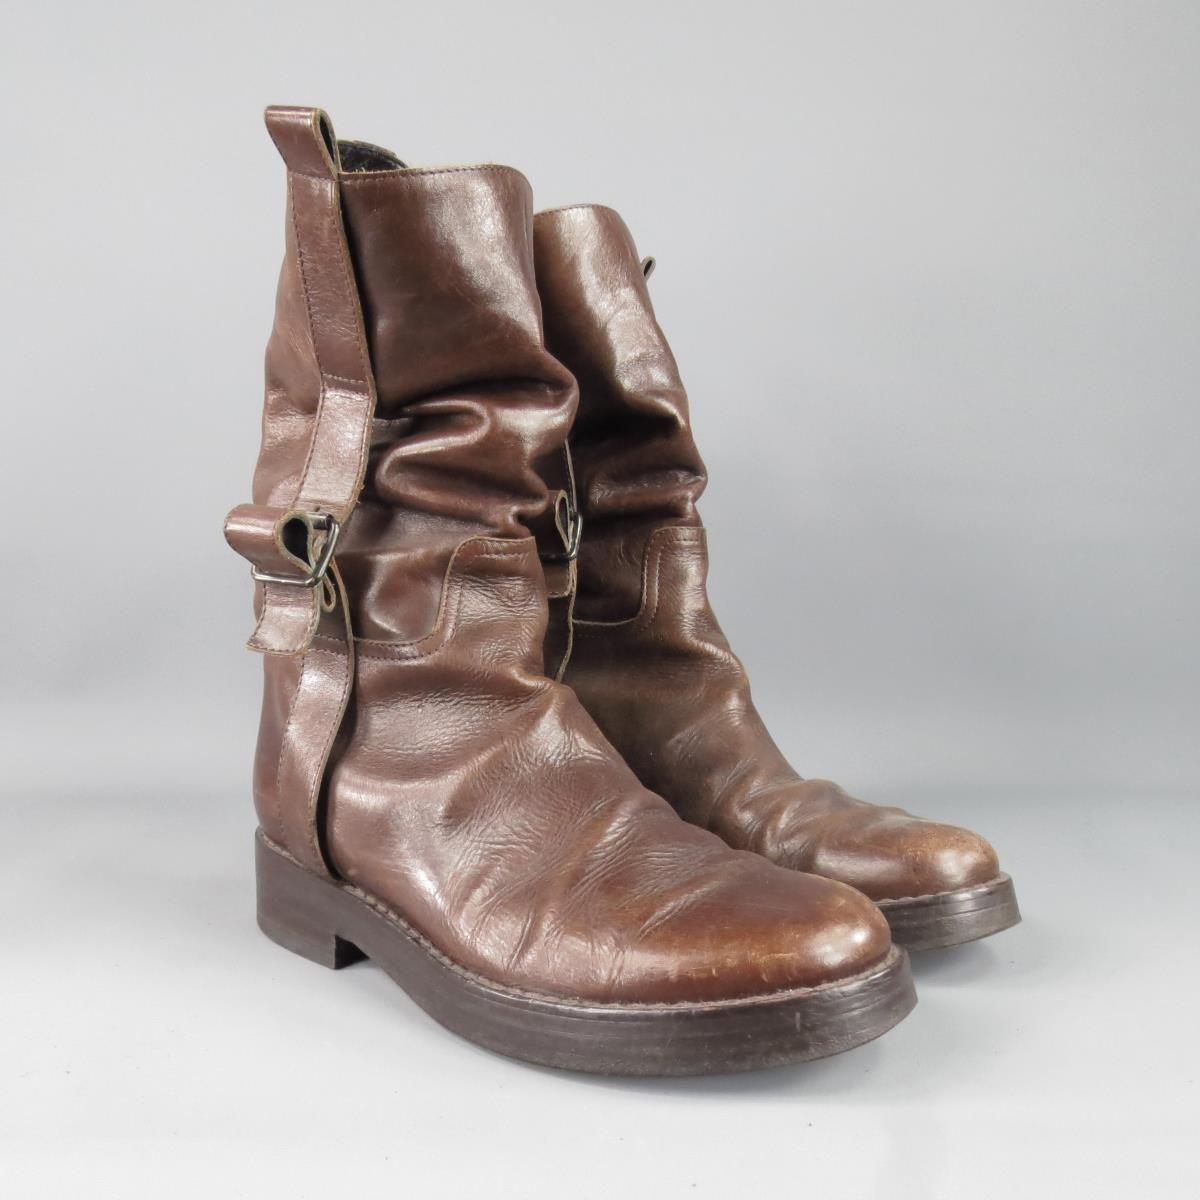 ANN DEMEULEMEESTER scrunched and distressed walking boot features unique brushes and intentional patina along a medium brown leather upper with rustic buckle accents, Made in Italy.
 
Good Pre-Owned Condition    Marked: 40
 
Measurements:
Insole: